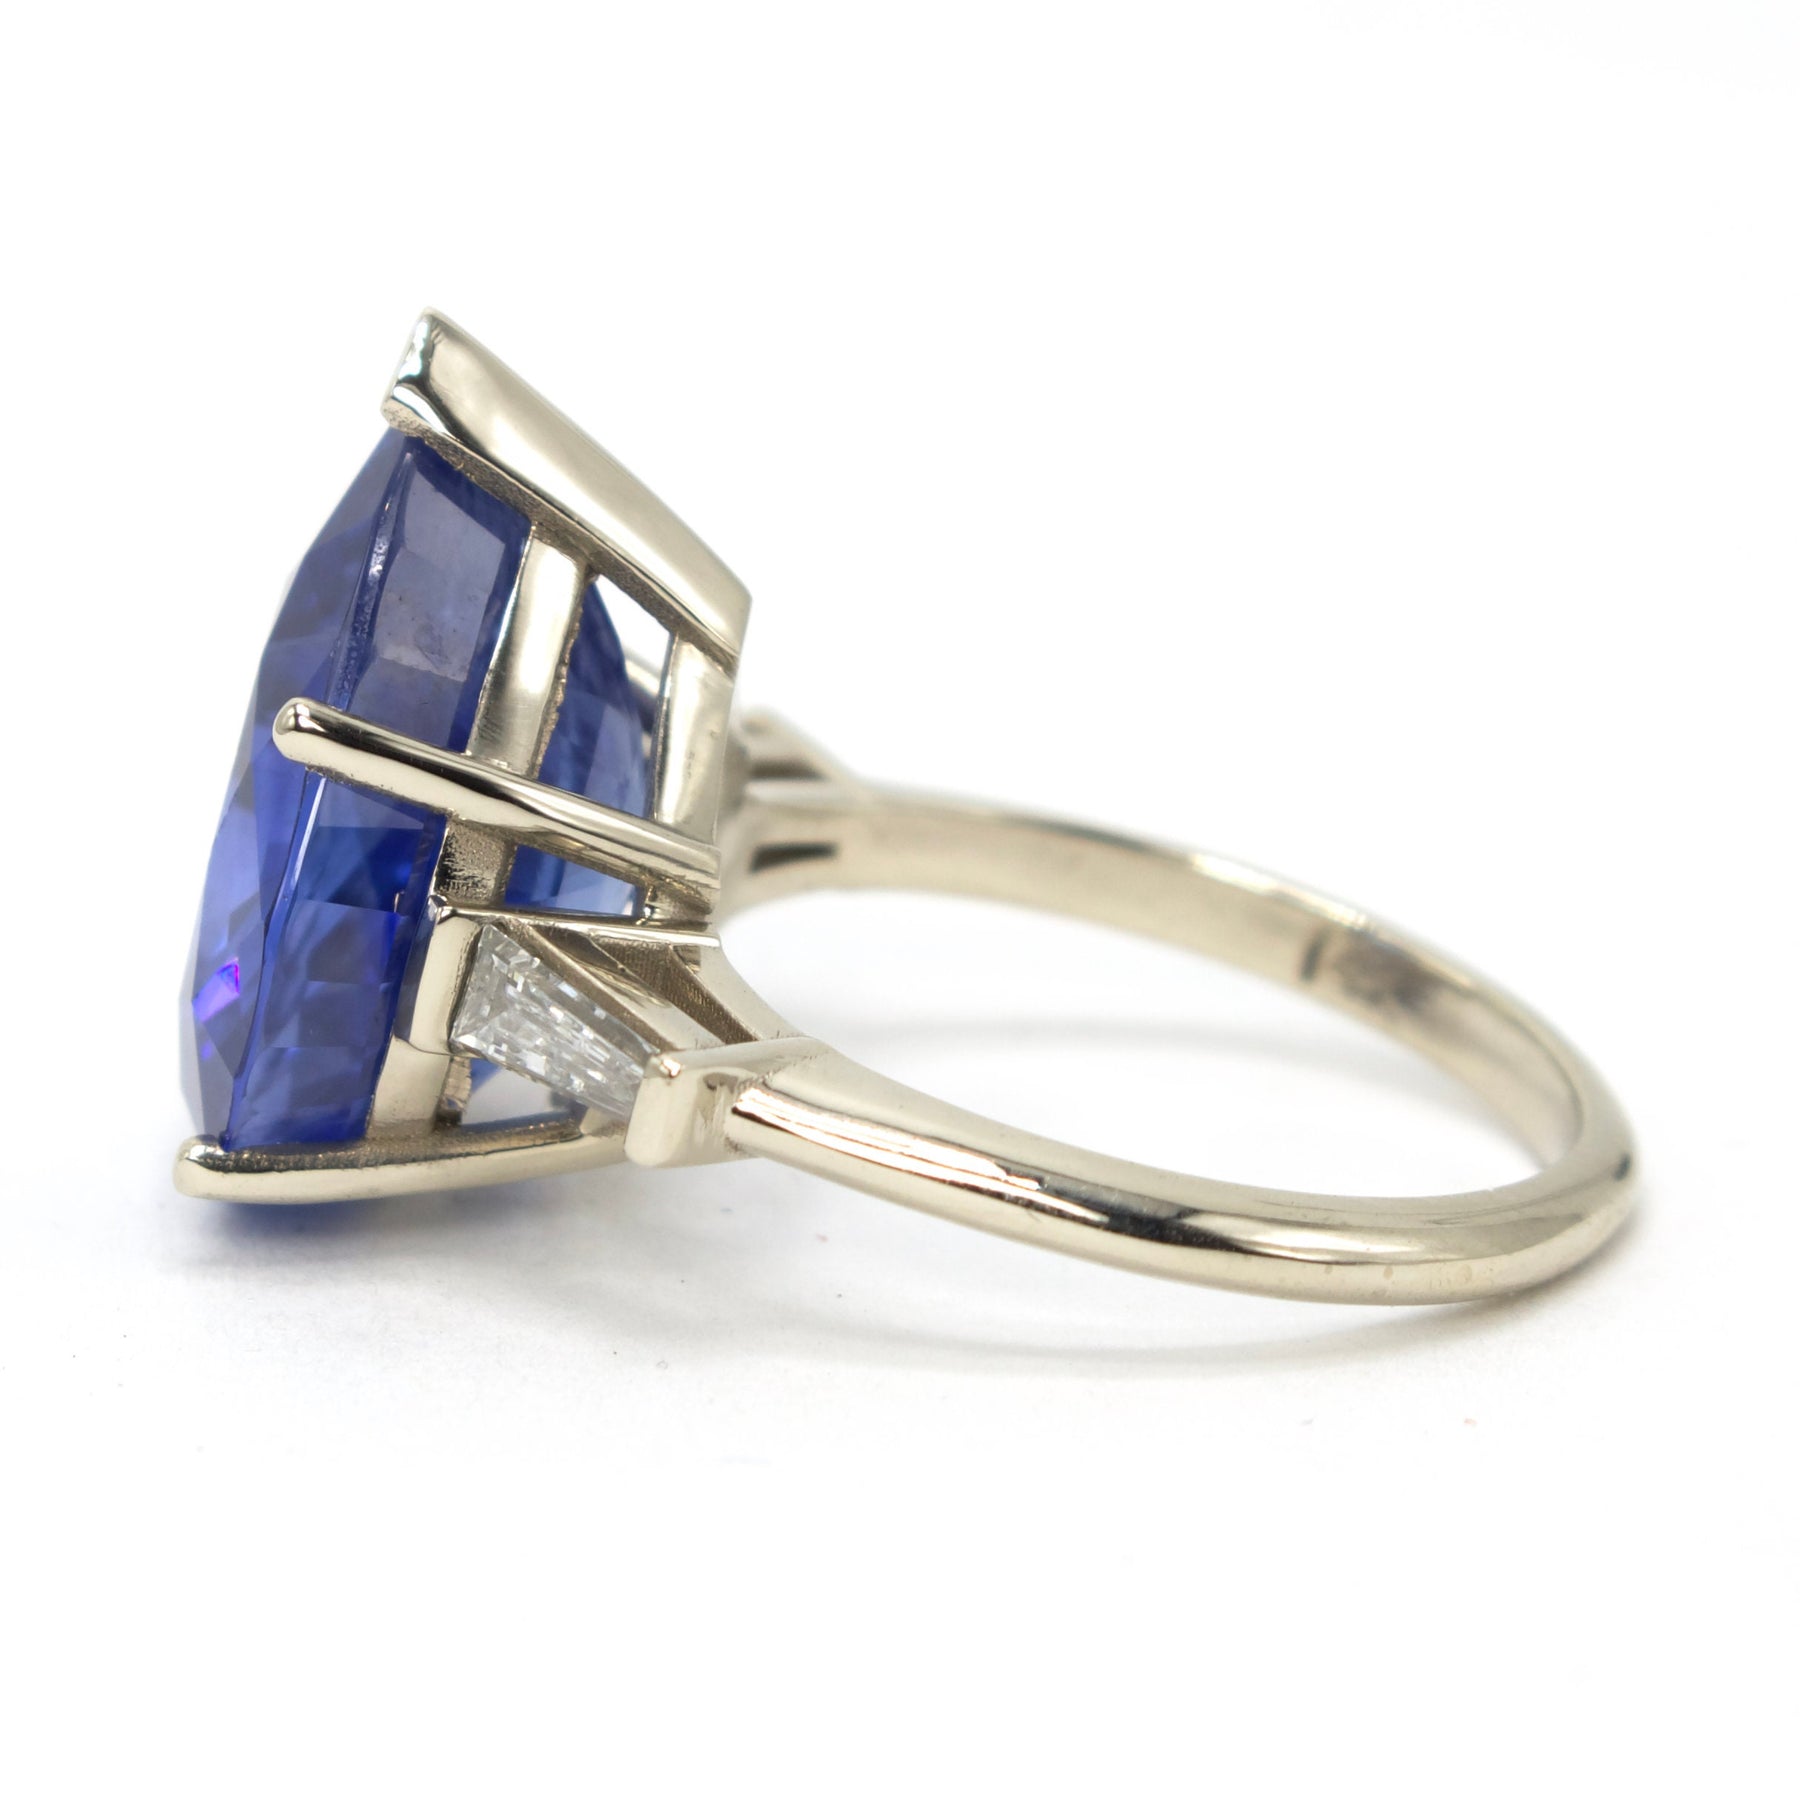 GIA Certified 12.70ct Pear Shaped Ceylon Blue Sapphire Ring with